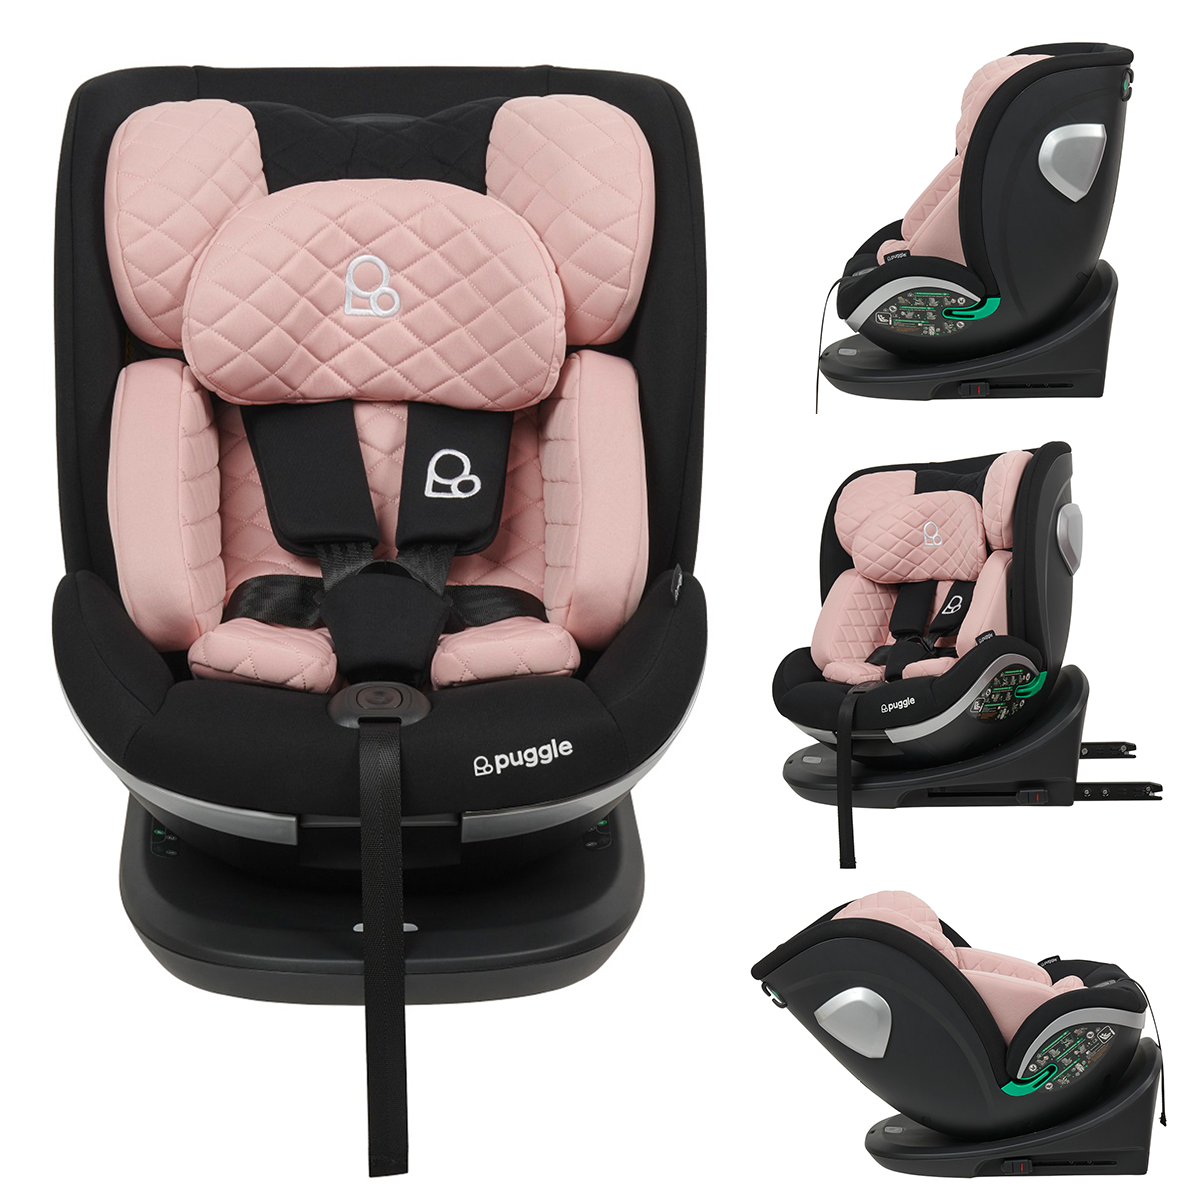 Puggle i-Size 40-150cm Safe Max Luxe Group 0+123 360° Rotate Car Seat - Blush Pink